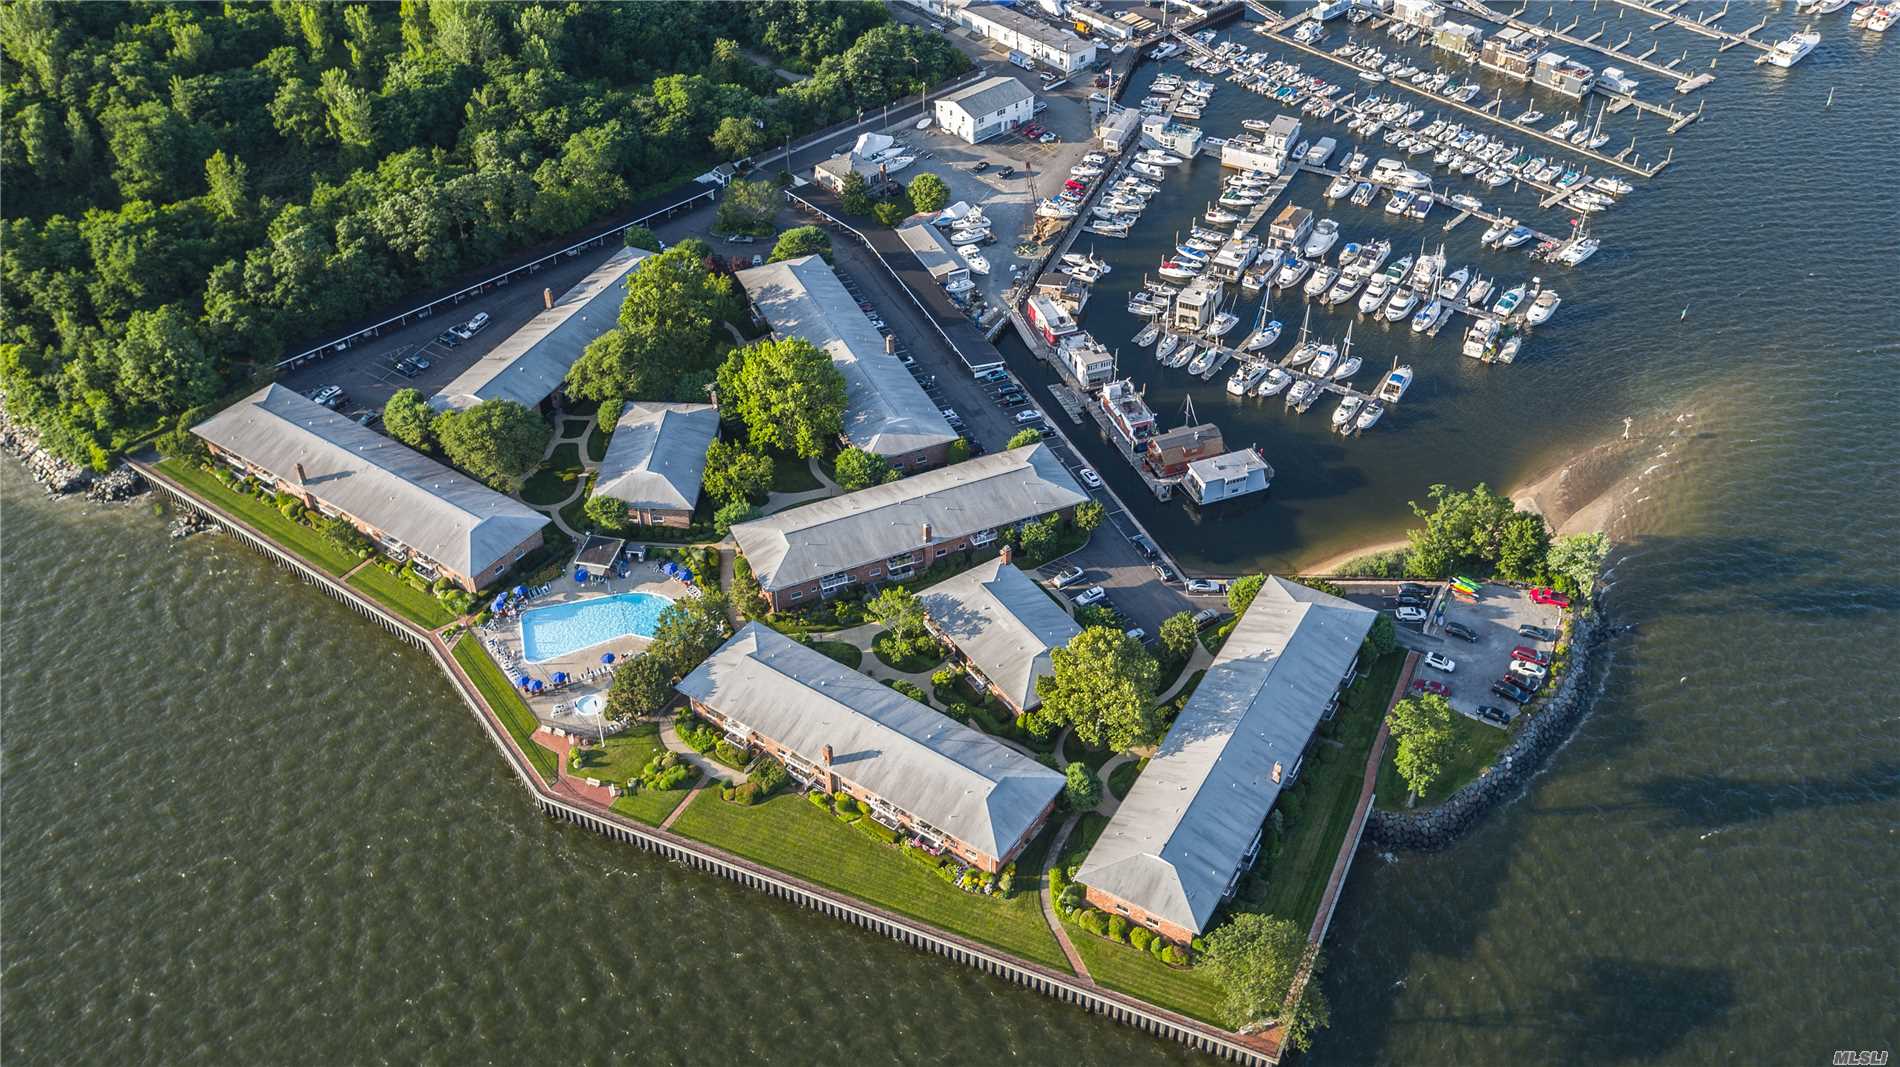 Water Views Abound At Manhasset Isle&rsquo;s 1 Toms Point. Recently Renovated 2 Bedroom, 2 Bath Unit With Breathtaking Direct Views Of The Community Pool, Manhasset Bay, And Community Courtyard. A True Gem In The Heart Of Port Washington! Unit Is In Building #5 Unit 10-I.